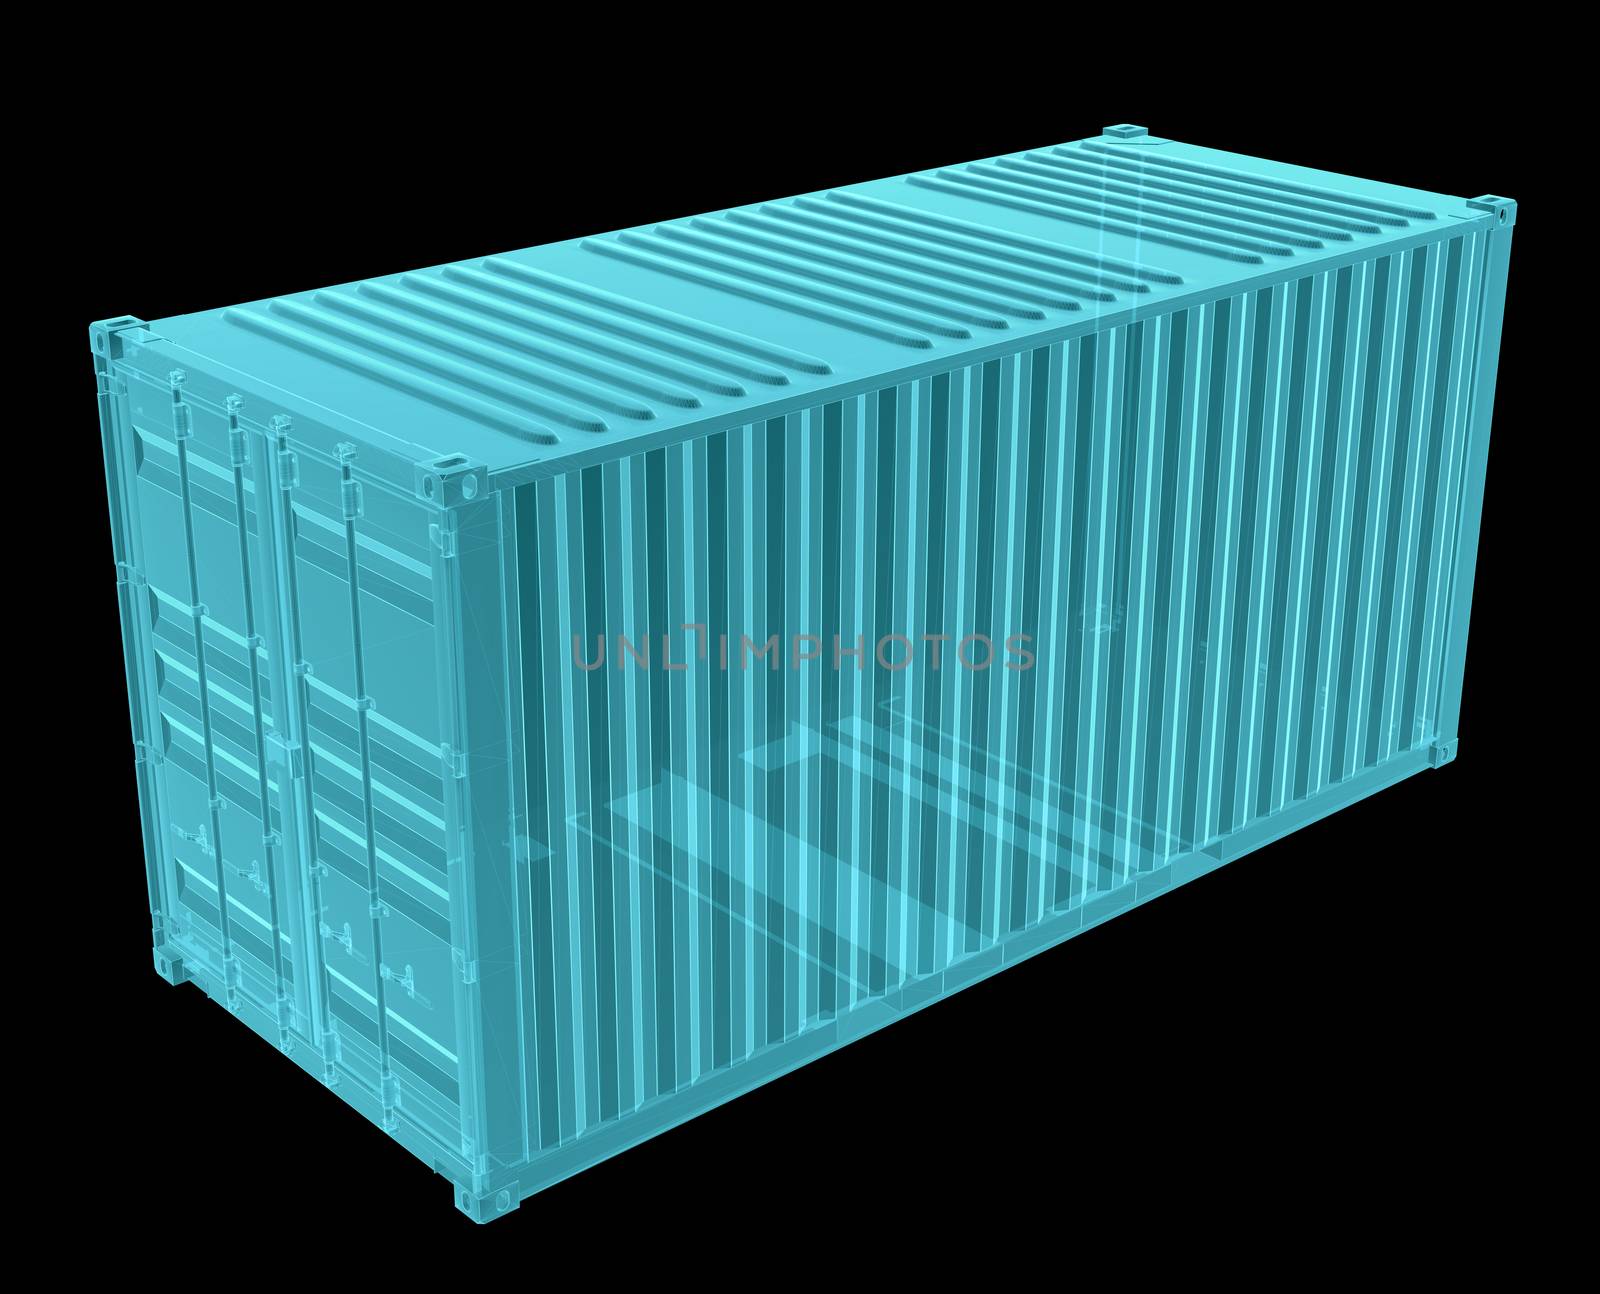 X-Ray Image Of Shipping container by cherezoff